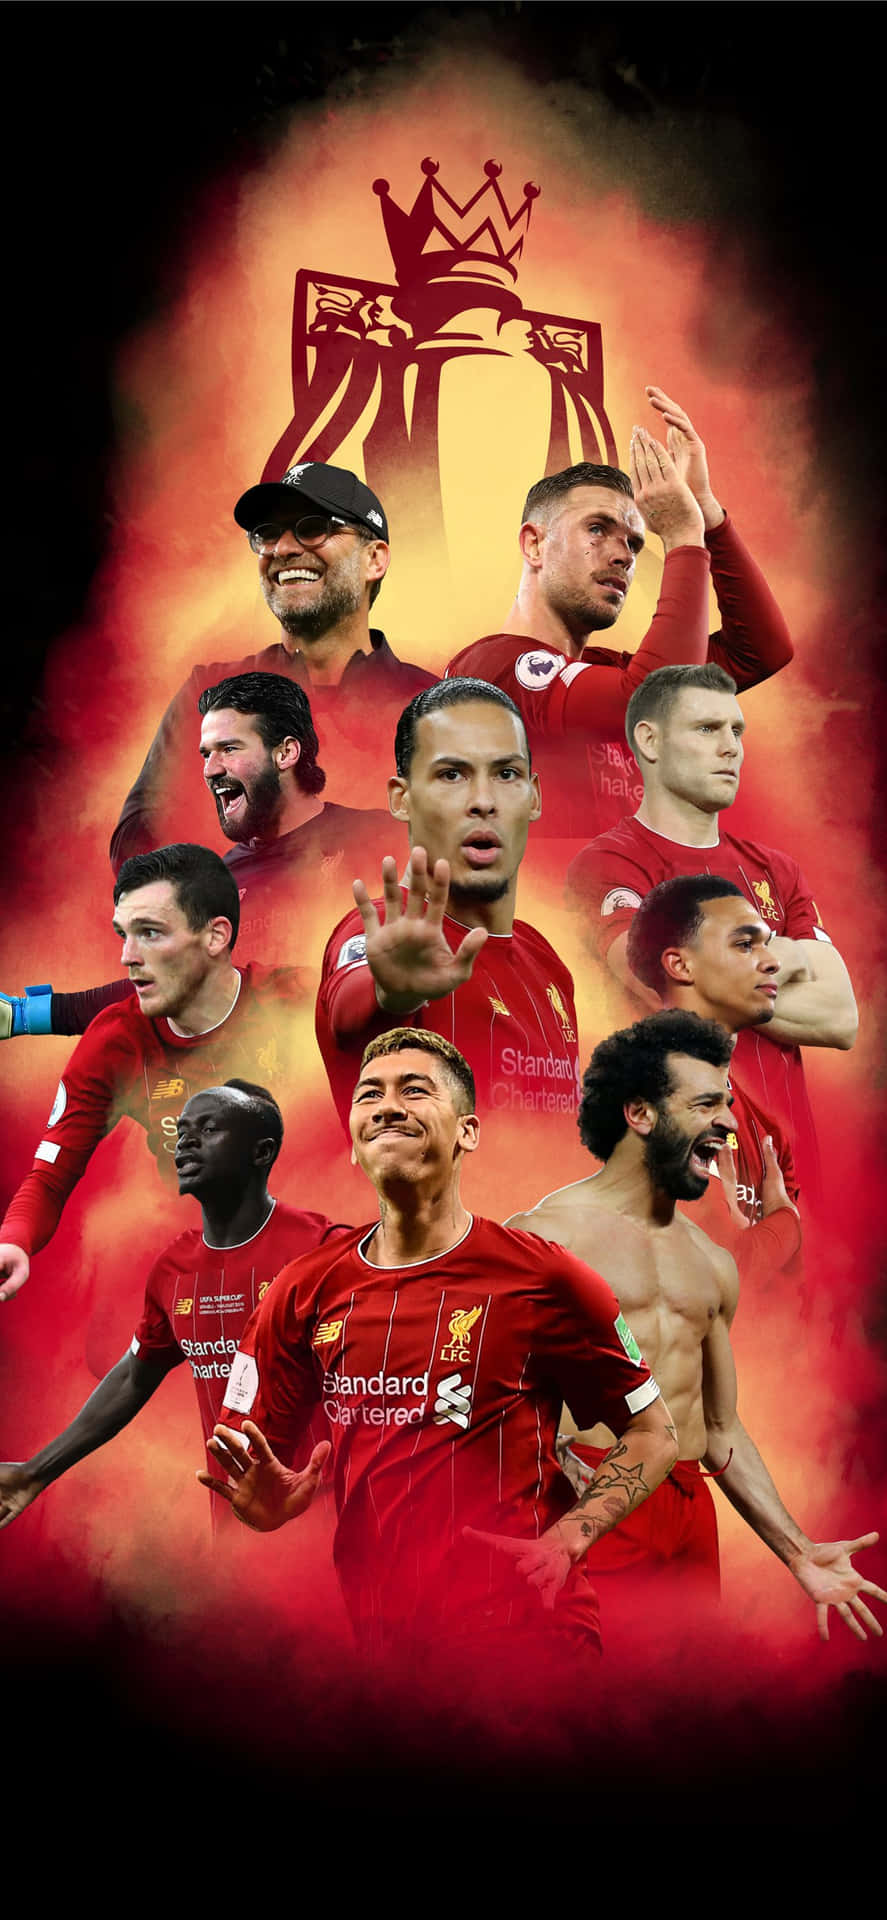 The Official Liverpool iPhone Wallpaper